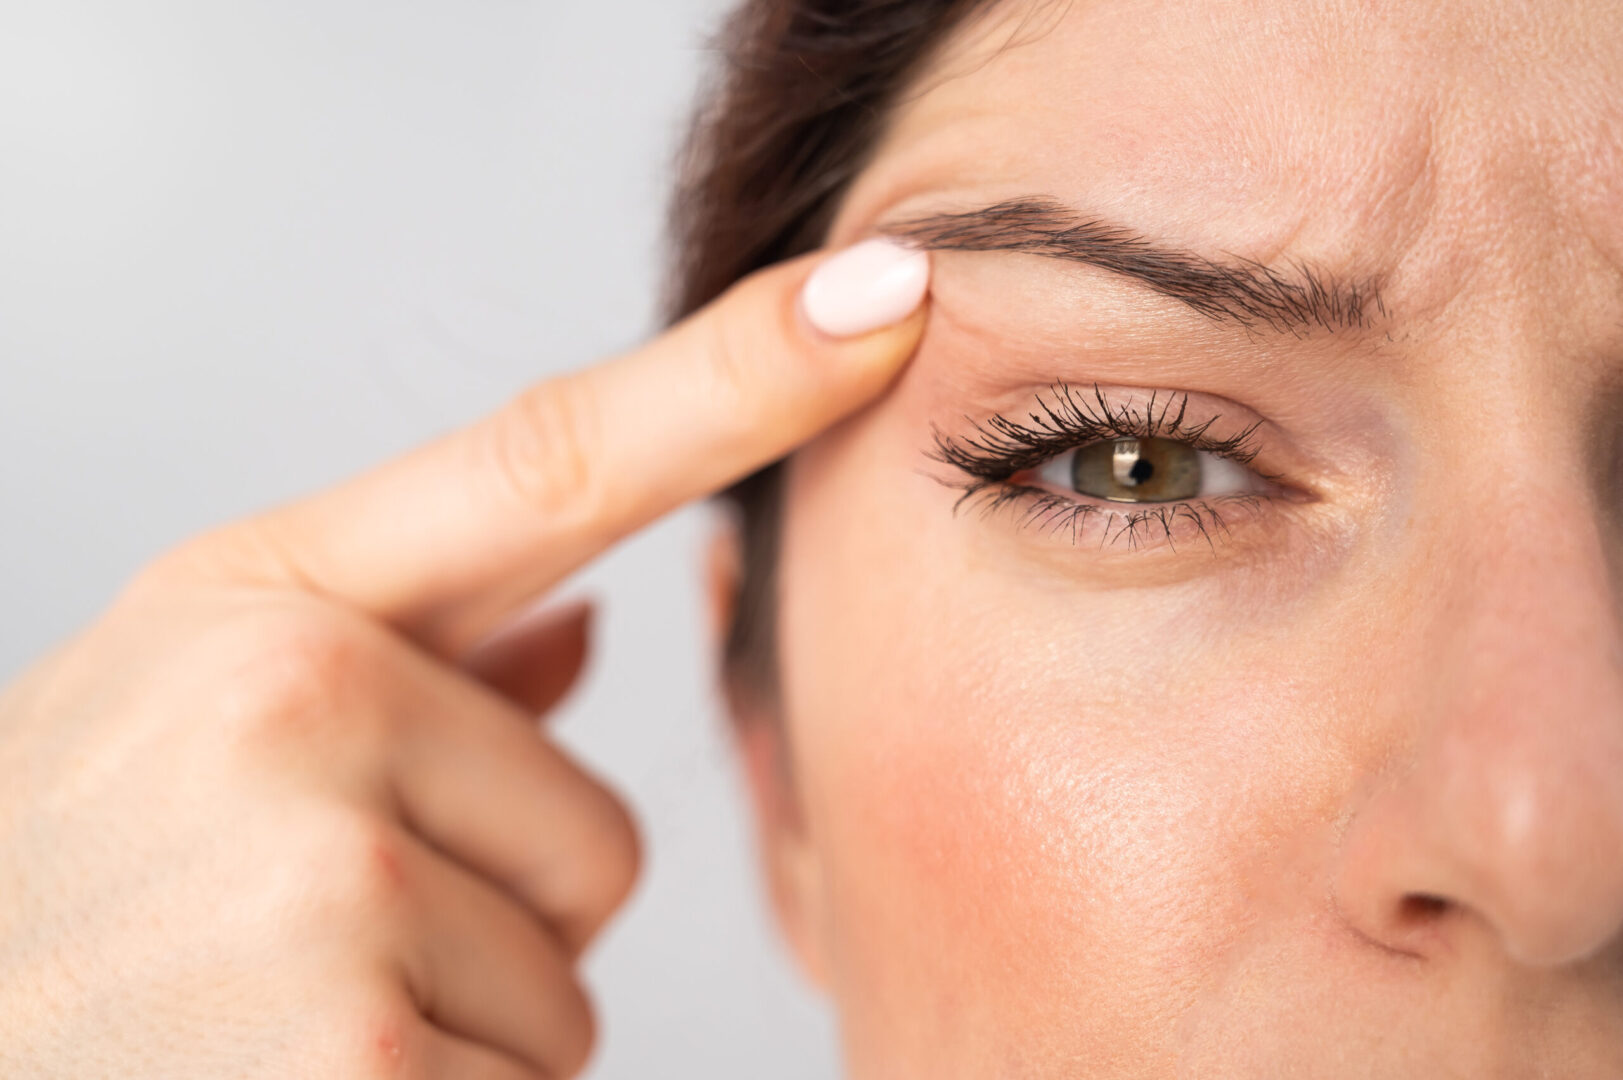 upper and lower eyelid surgery to reduce signs of aging with Aspire Surgical in Salt Lake City, UT